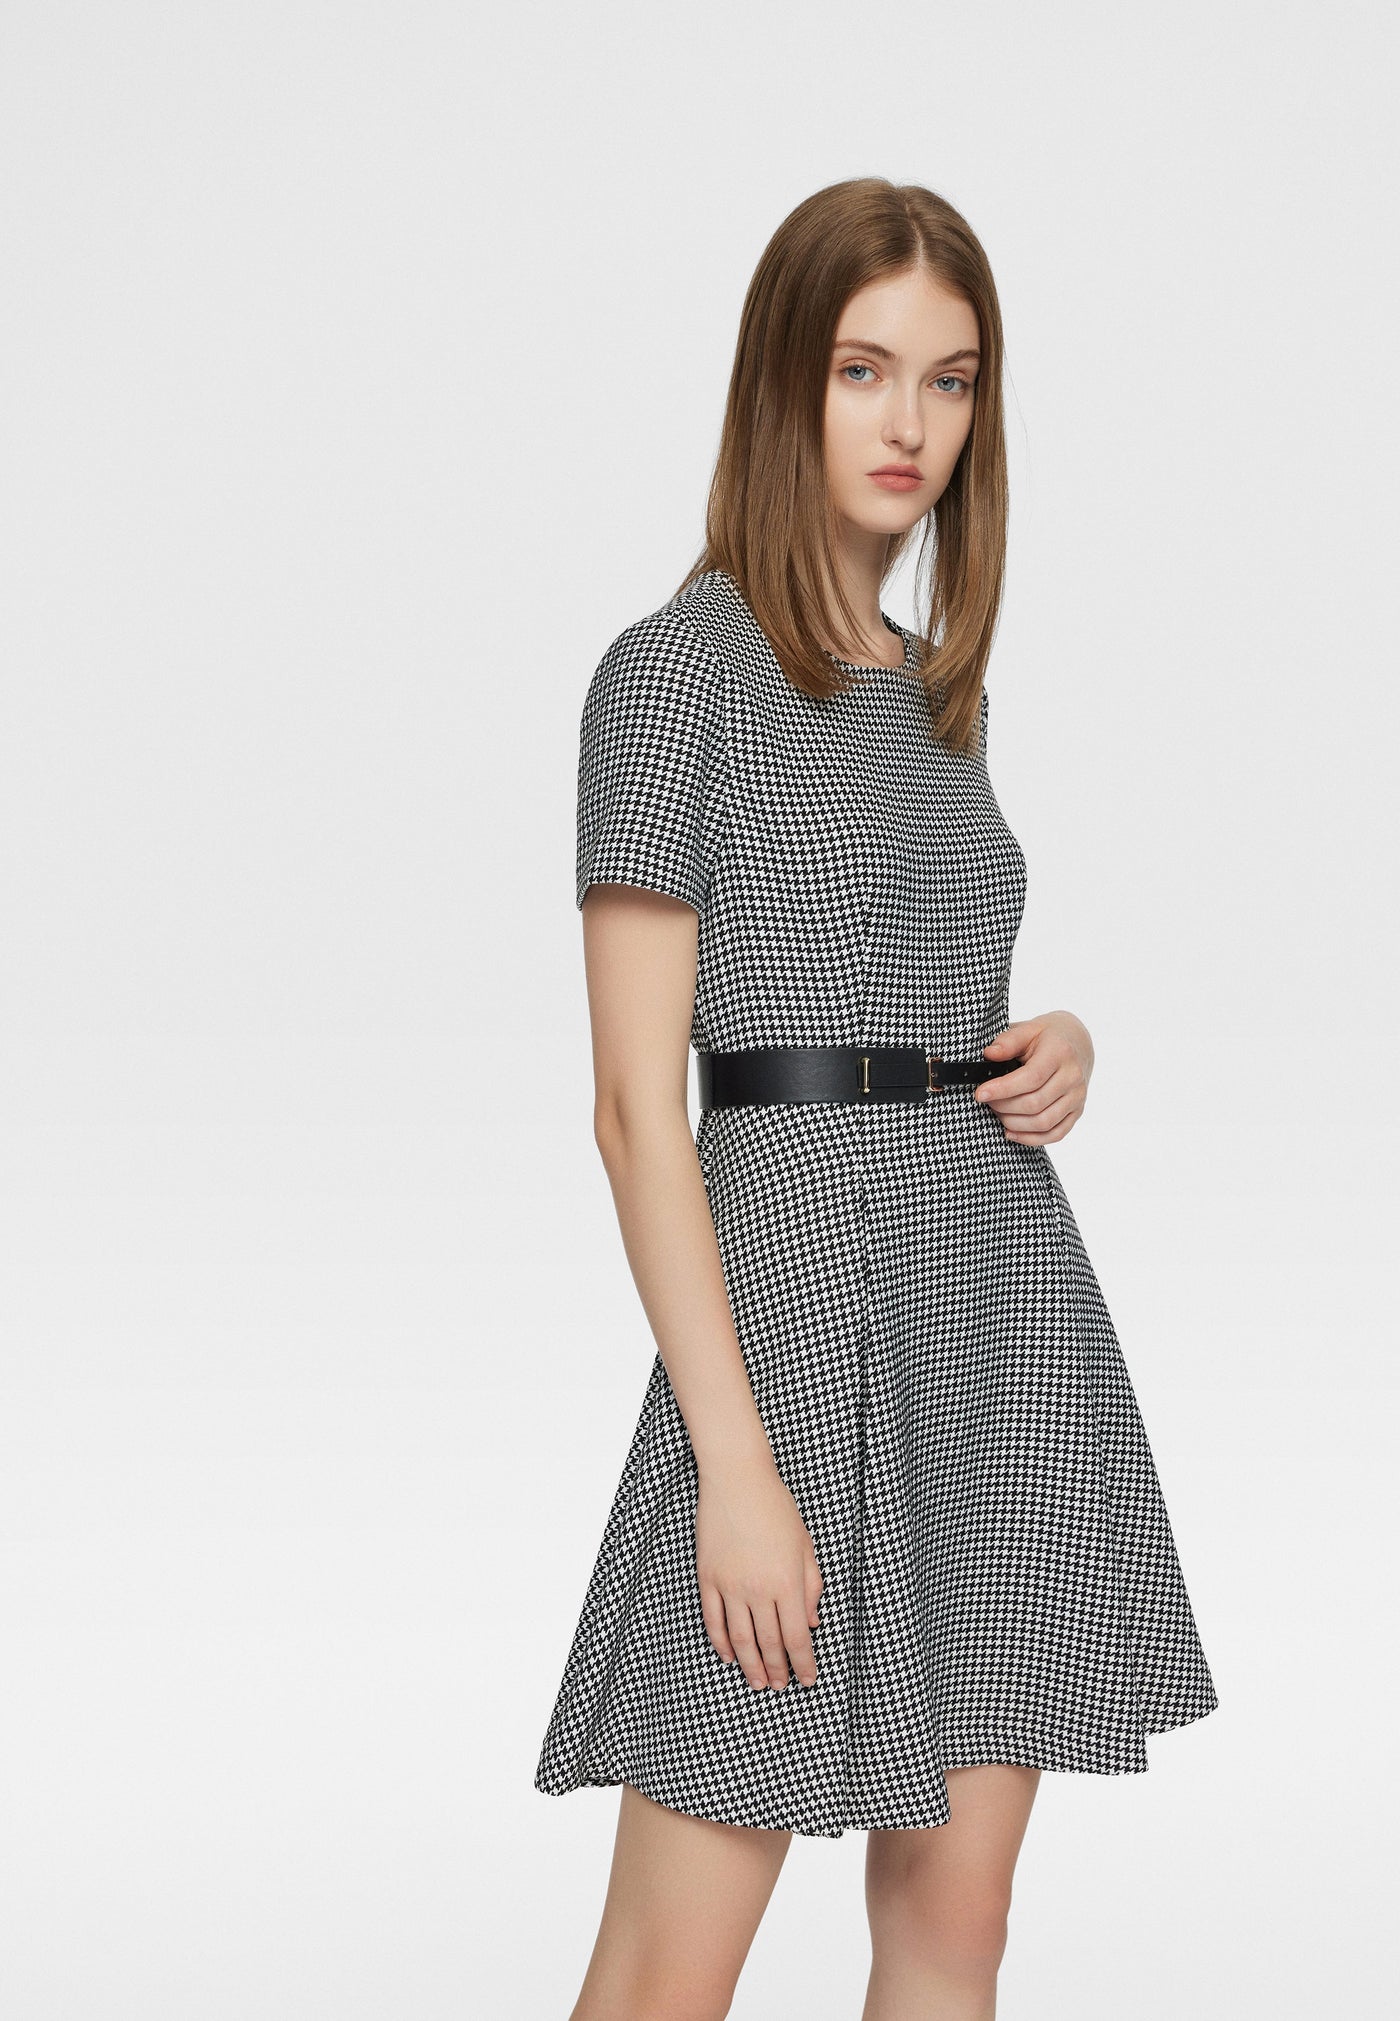 Women Clothing Twiggy Houndstooth Dress - Fit & Flare Shape